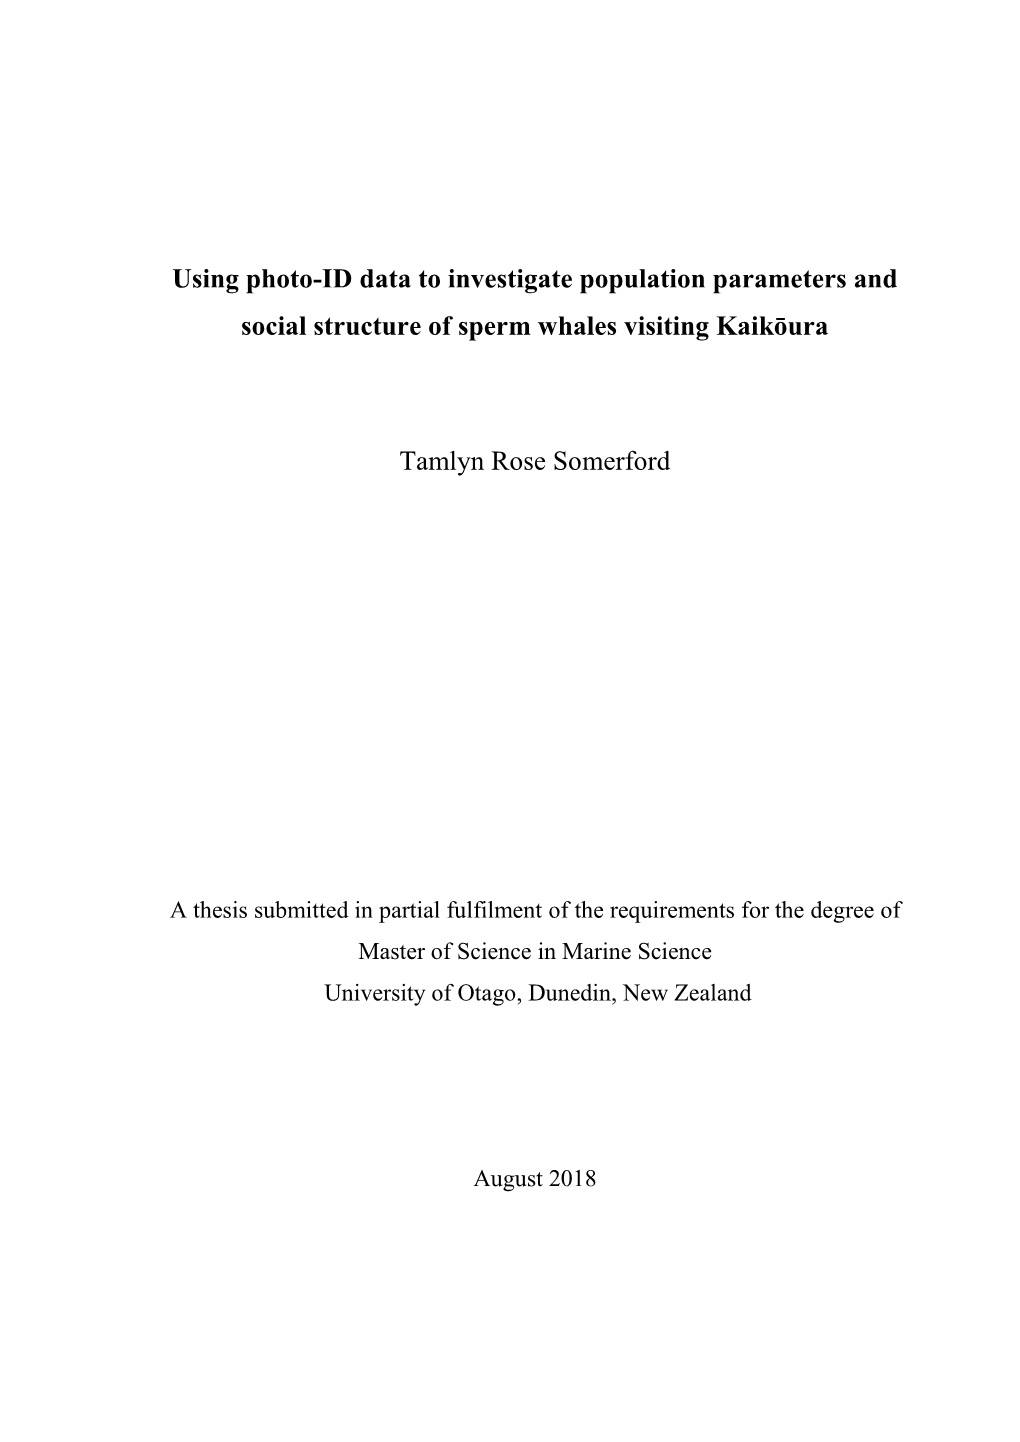 Using Photo-ID Data to Investigate Population Parameters and Social Structure of Sperm Whales Visiting Kaikōura